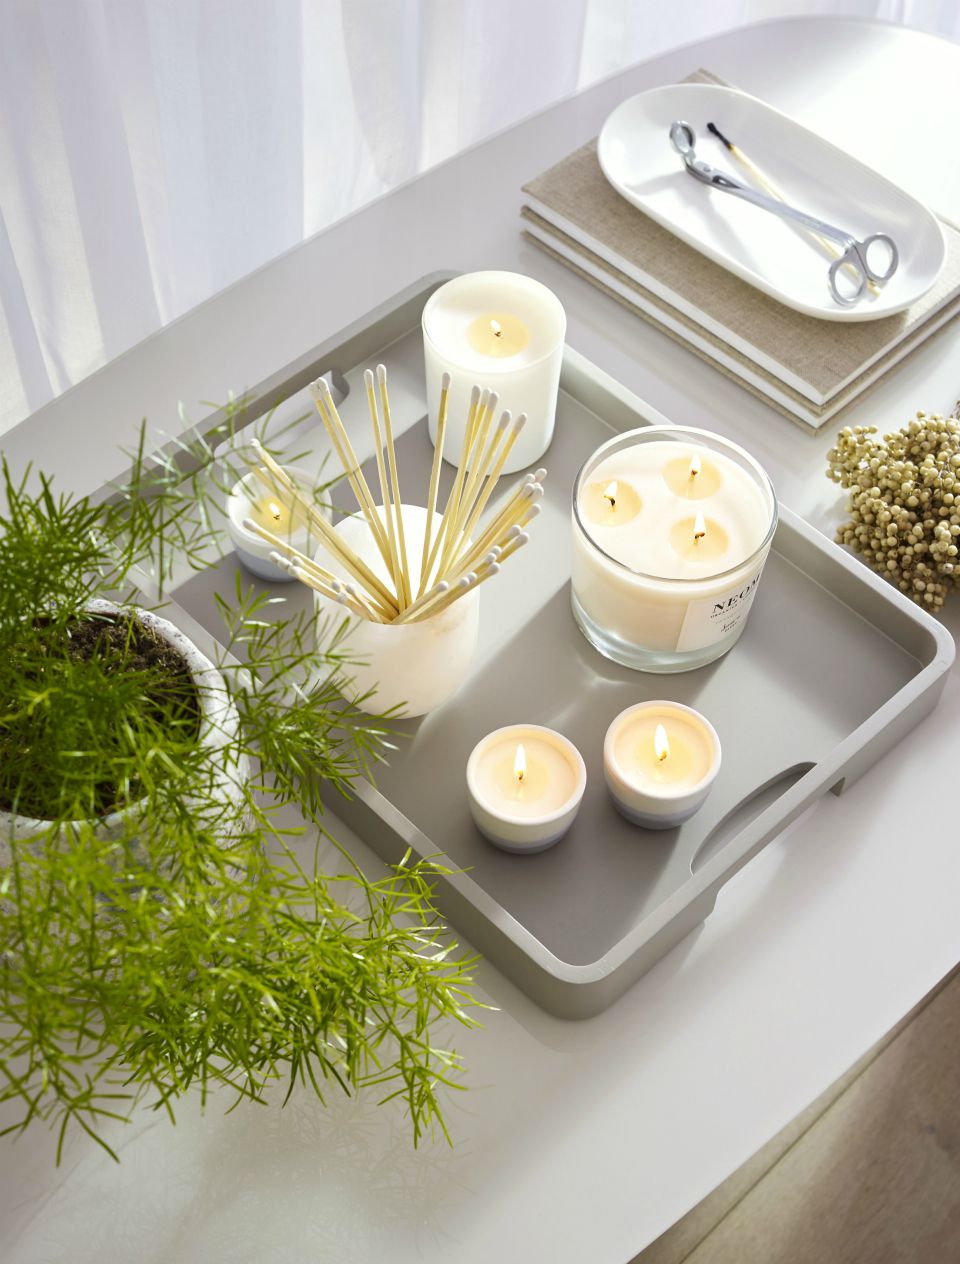 Candles on a tray